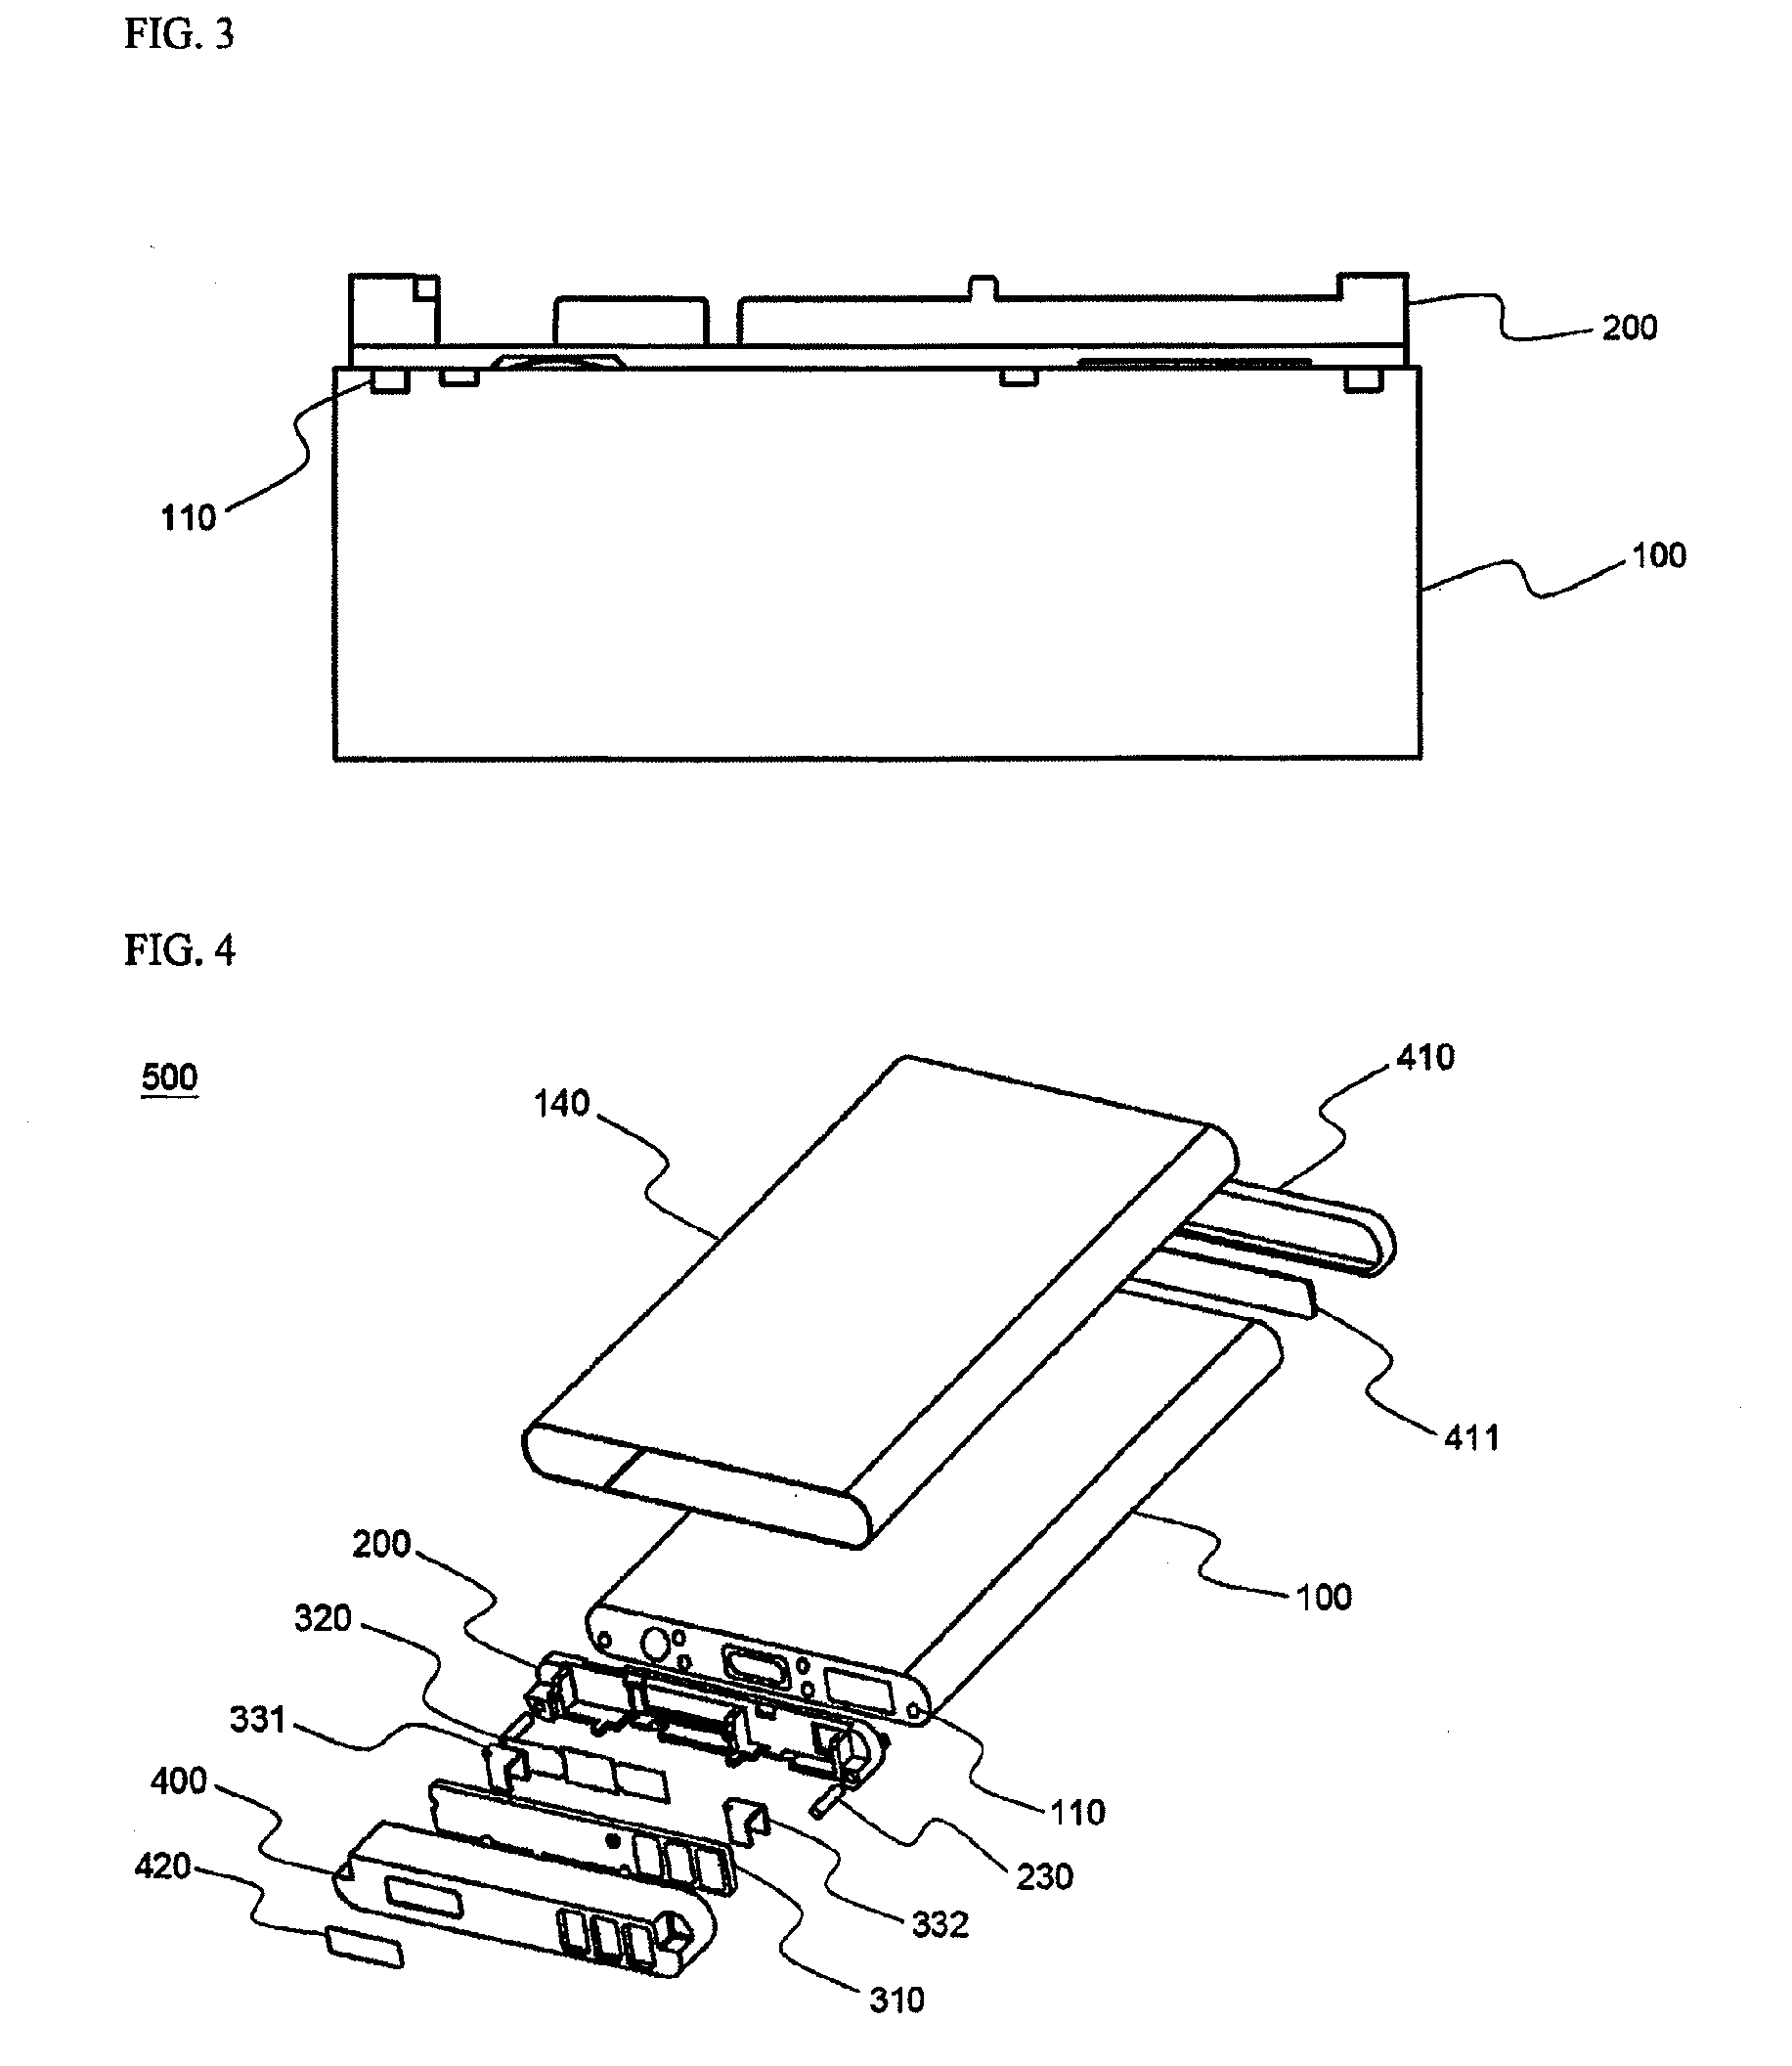 Secondary battery pack having excellent production process property and structural stability